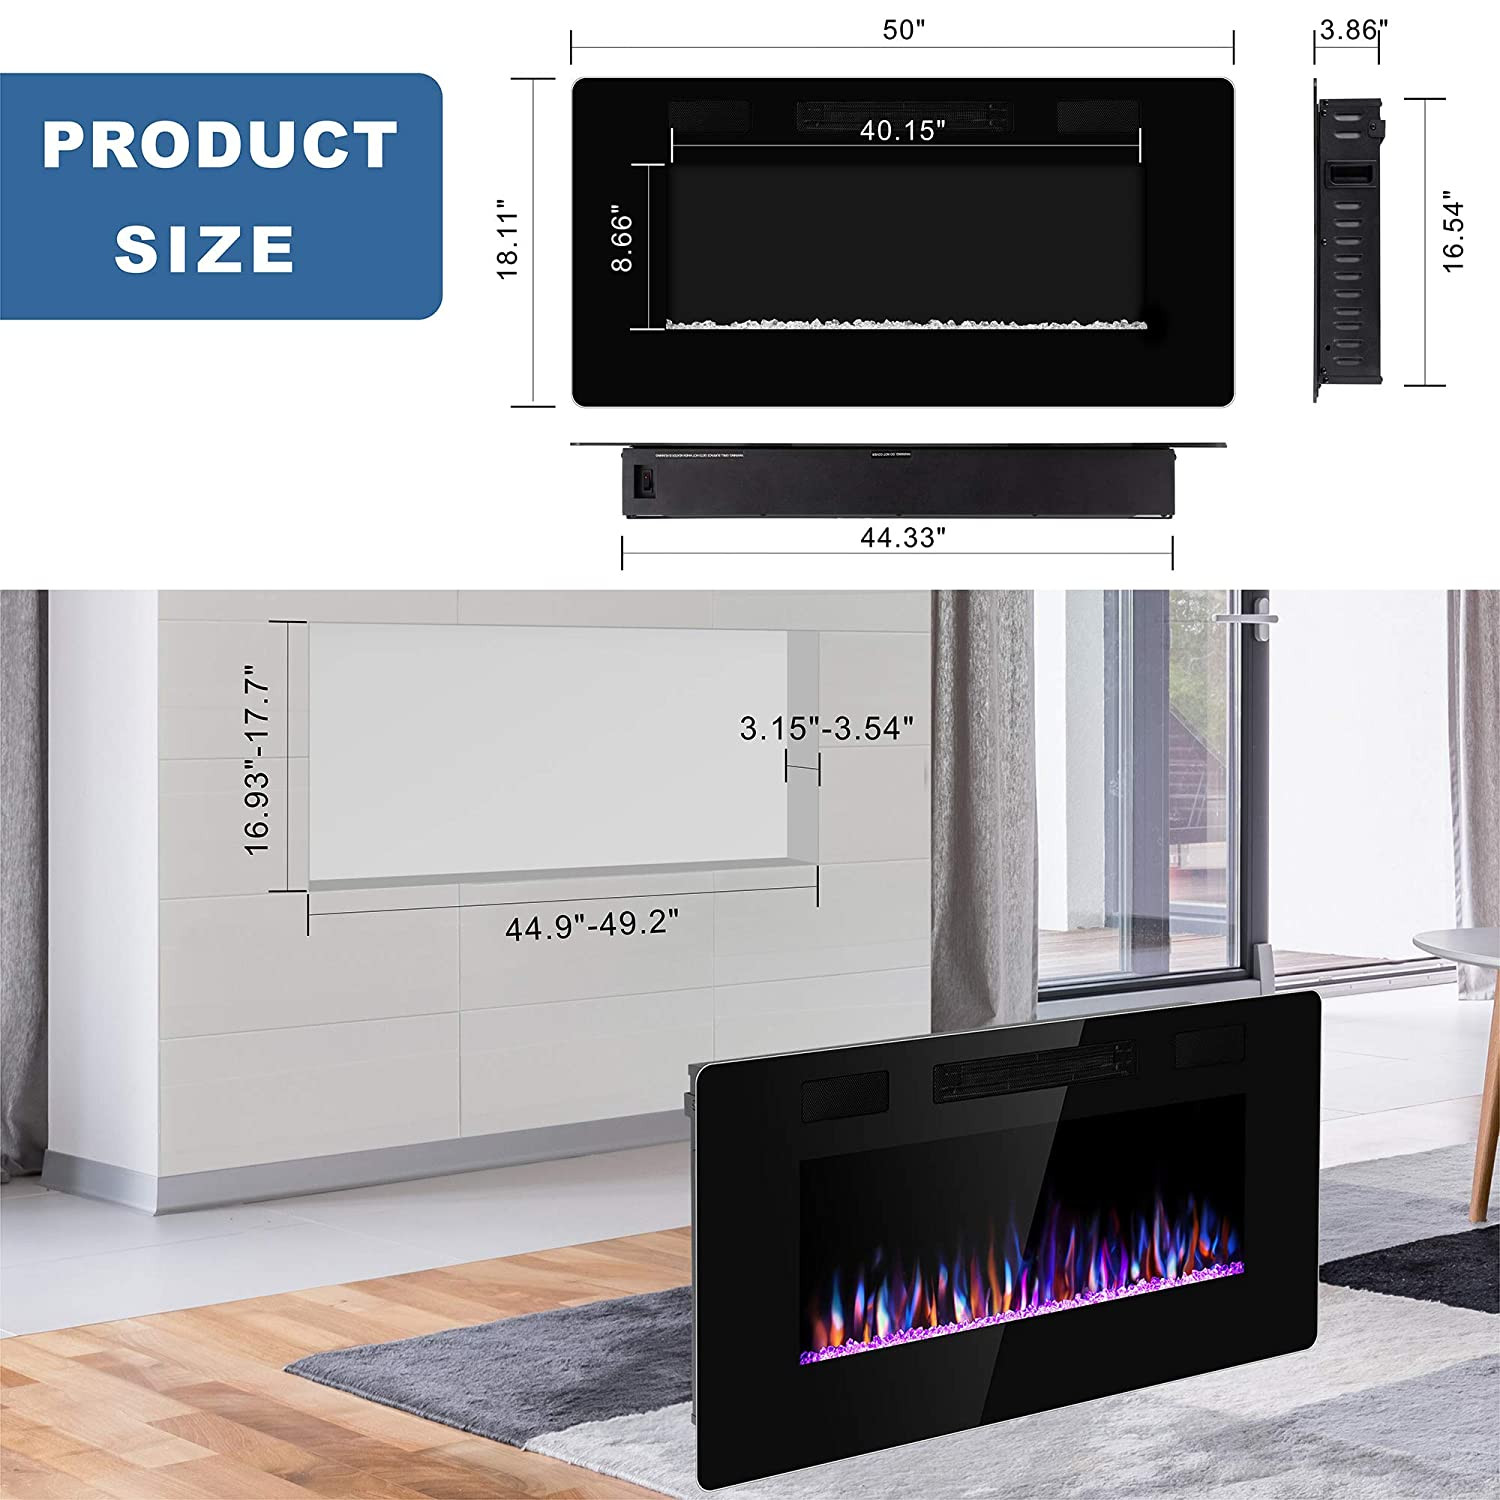 Thin Electric Fireplace
 Xbeauty 50 Inch Wall Mounted Recessed Electric Fireplace